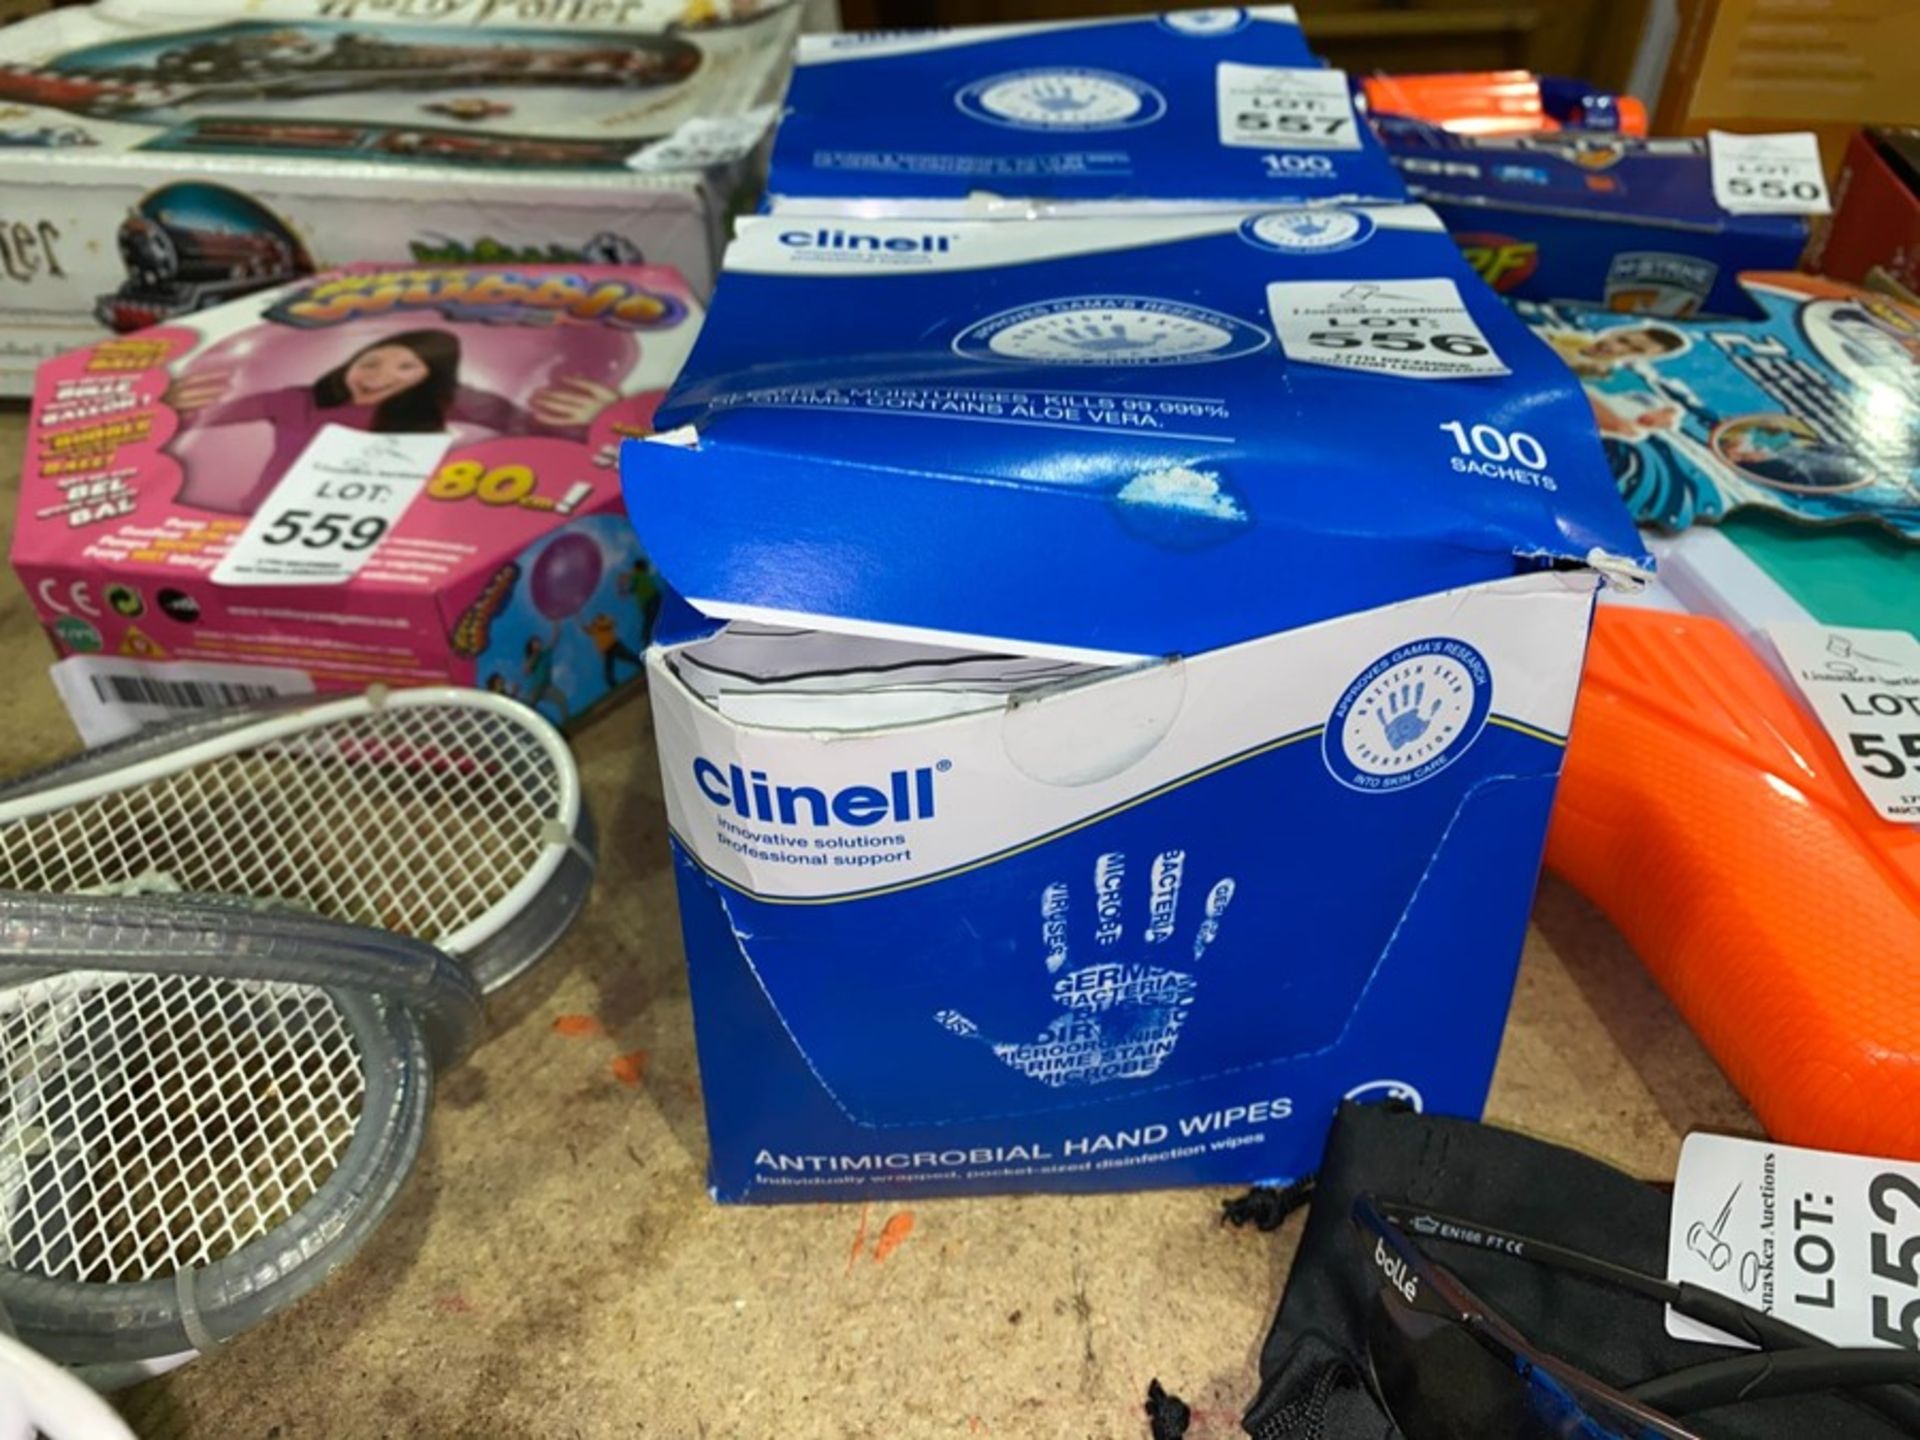 CLINELL ANTI MICROBIAL HAND WIPES (100)